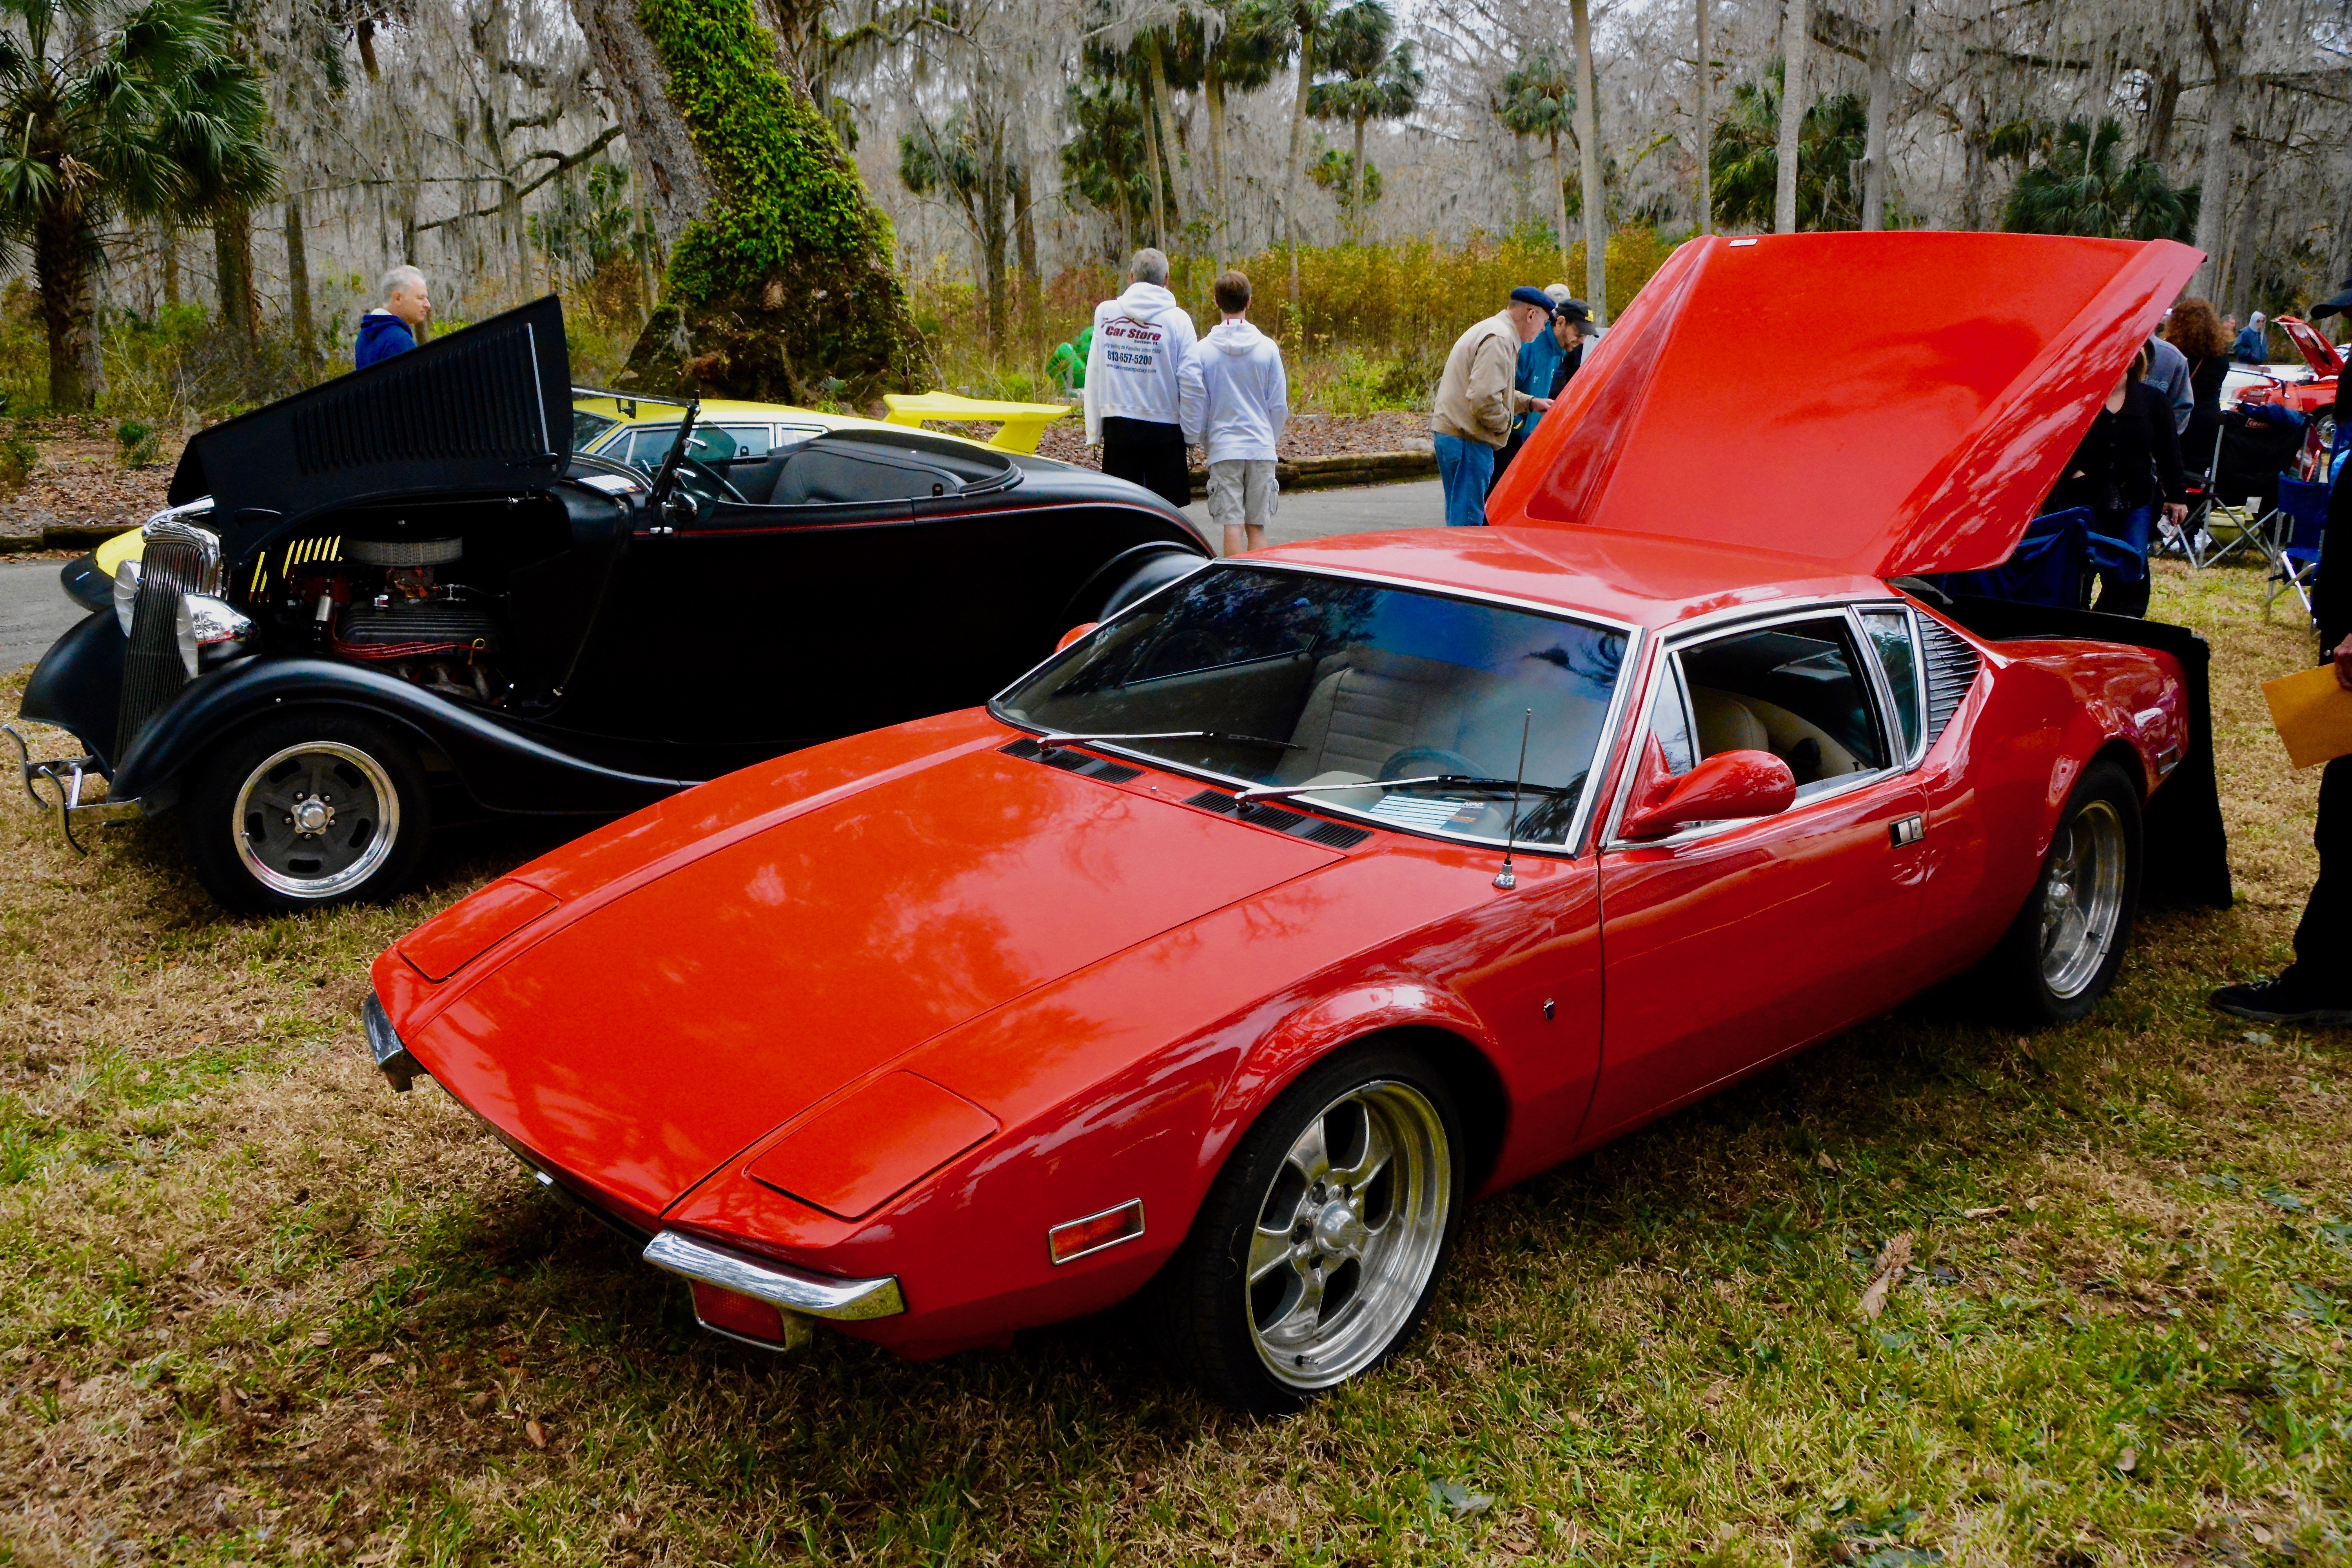 , A festival of Fords in Florida, ClassicCars.com Journal